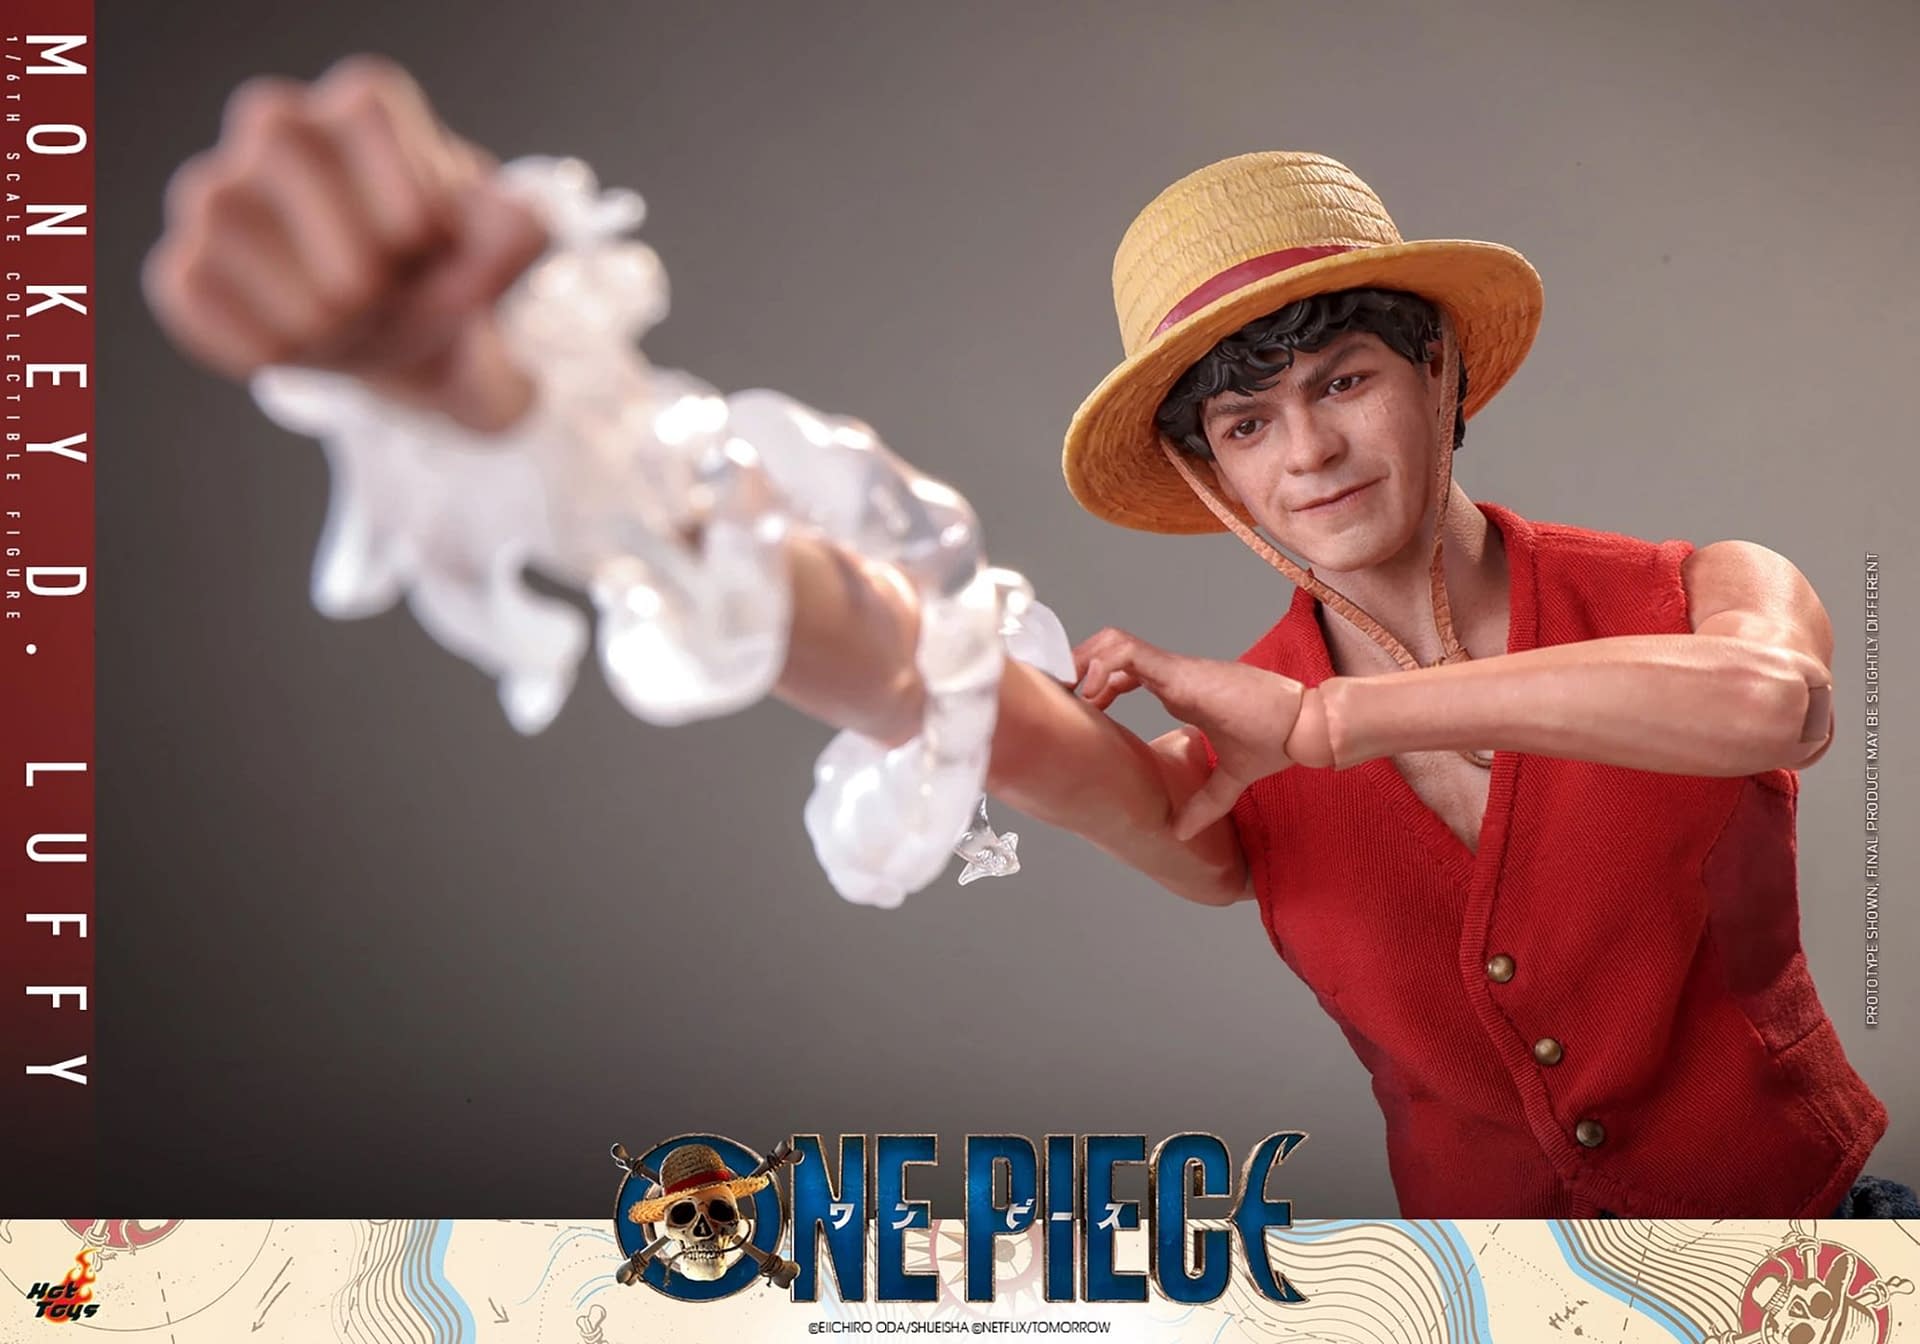 Television Masterpiece - Scale Fully Poseable Figure: ONE PIECE (Netflix) -  Monkey D. Luffy